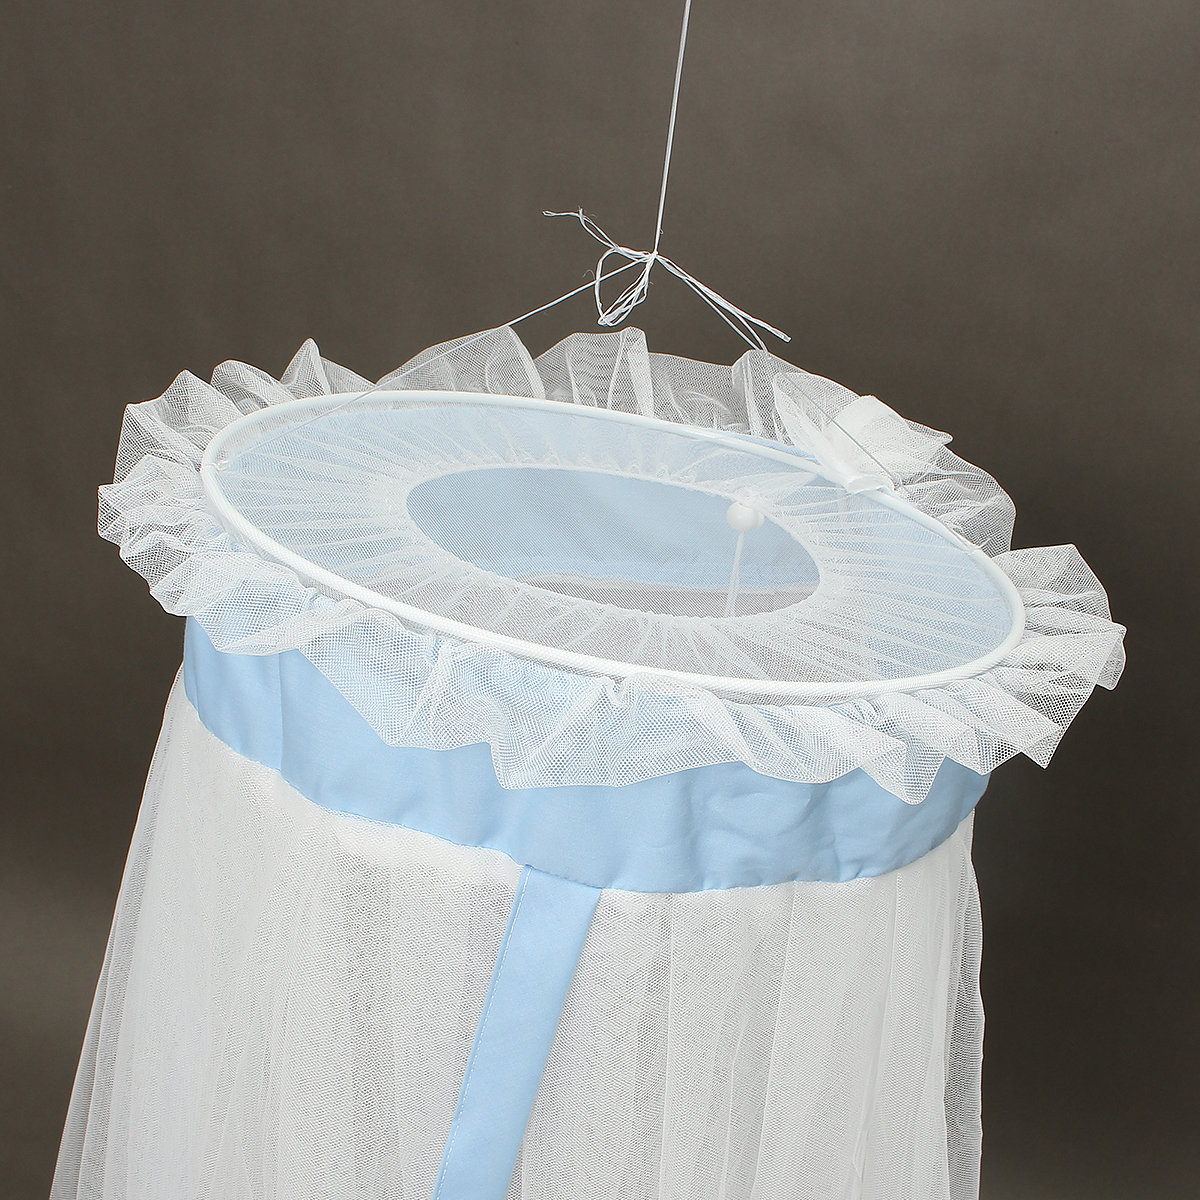 Mosquito-Net-Children-Bed-Curtain-Dome-Cot-Netting-Drape-Stand-Insect-Protection-1818006-6